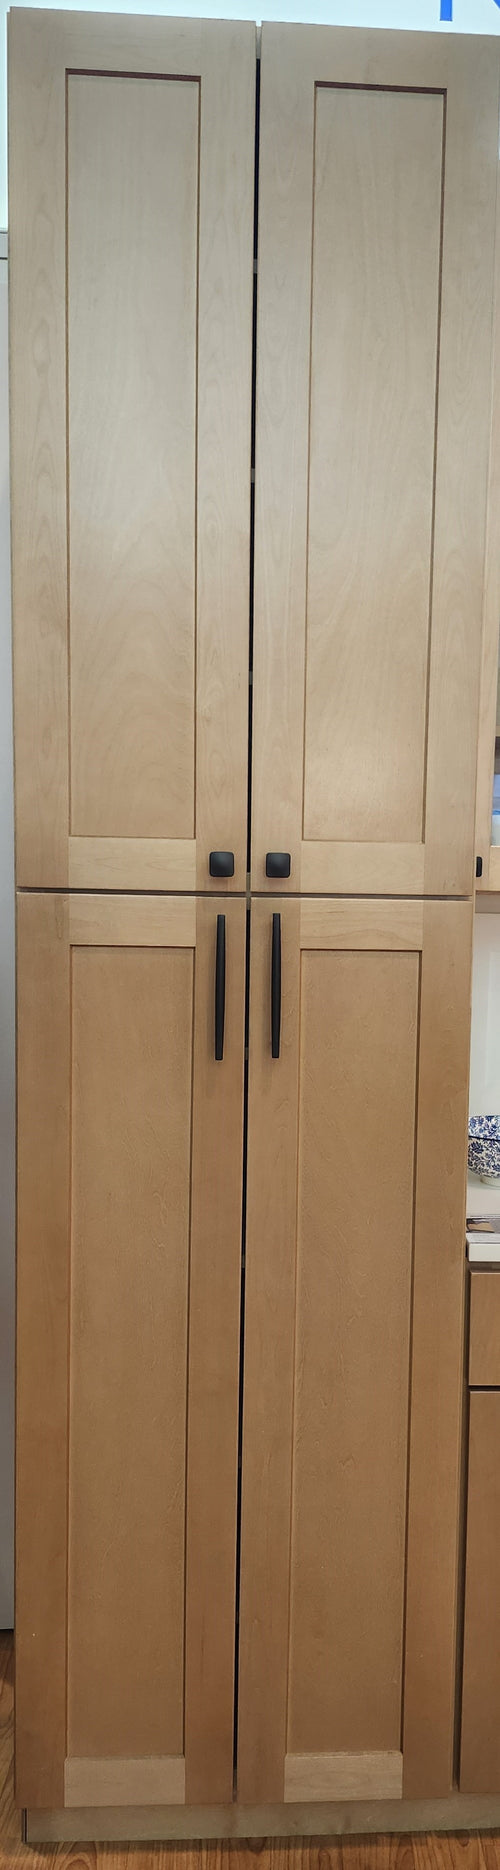 84" Tall Pantry Sandstone Birch  Shaker 1-1/4" Overlay Cabinet Available 18", 24" & 30" Wide